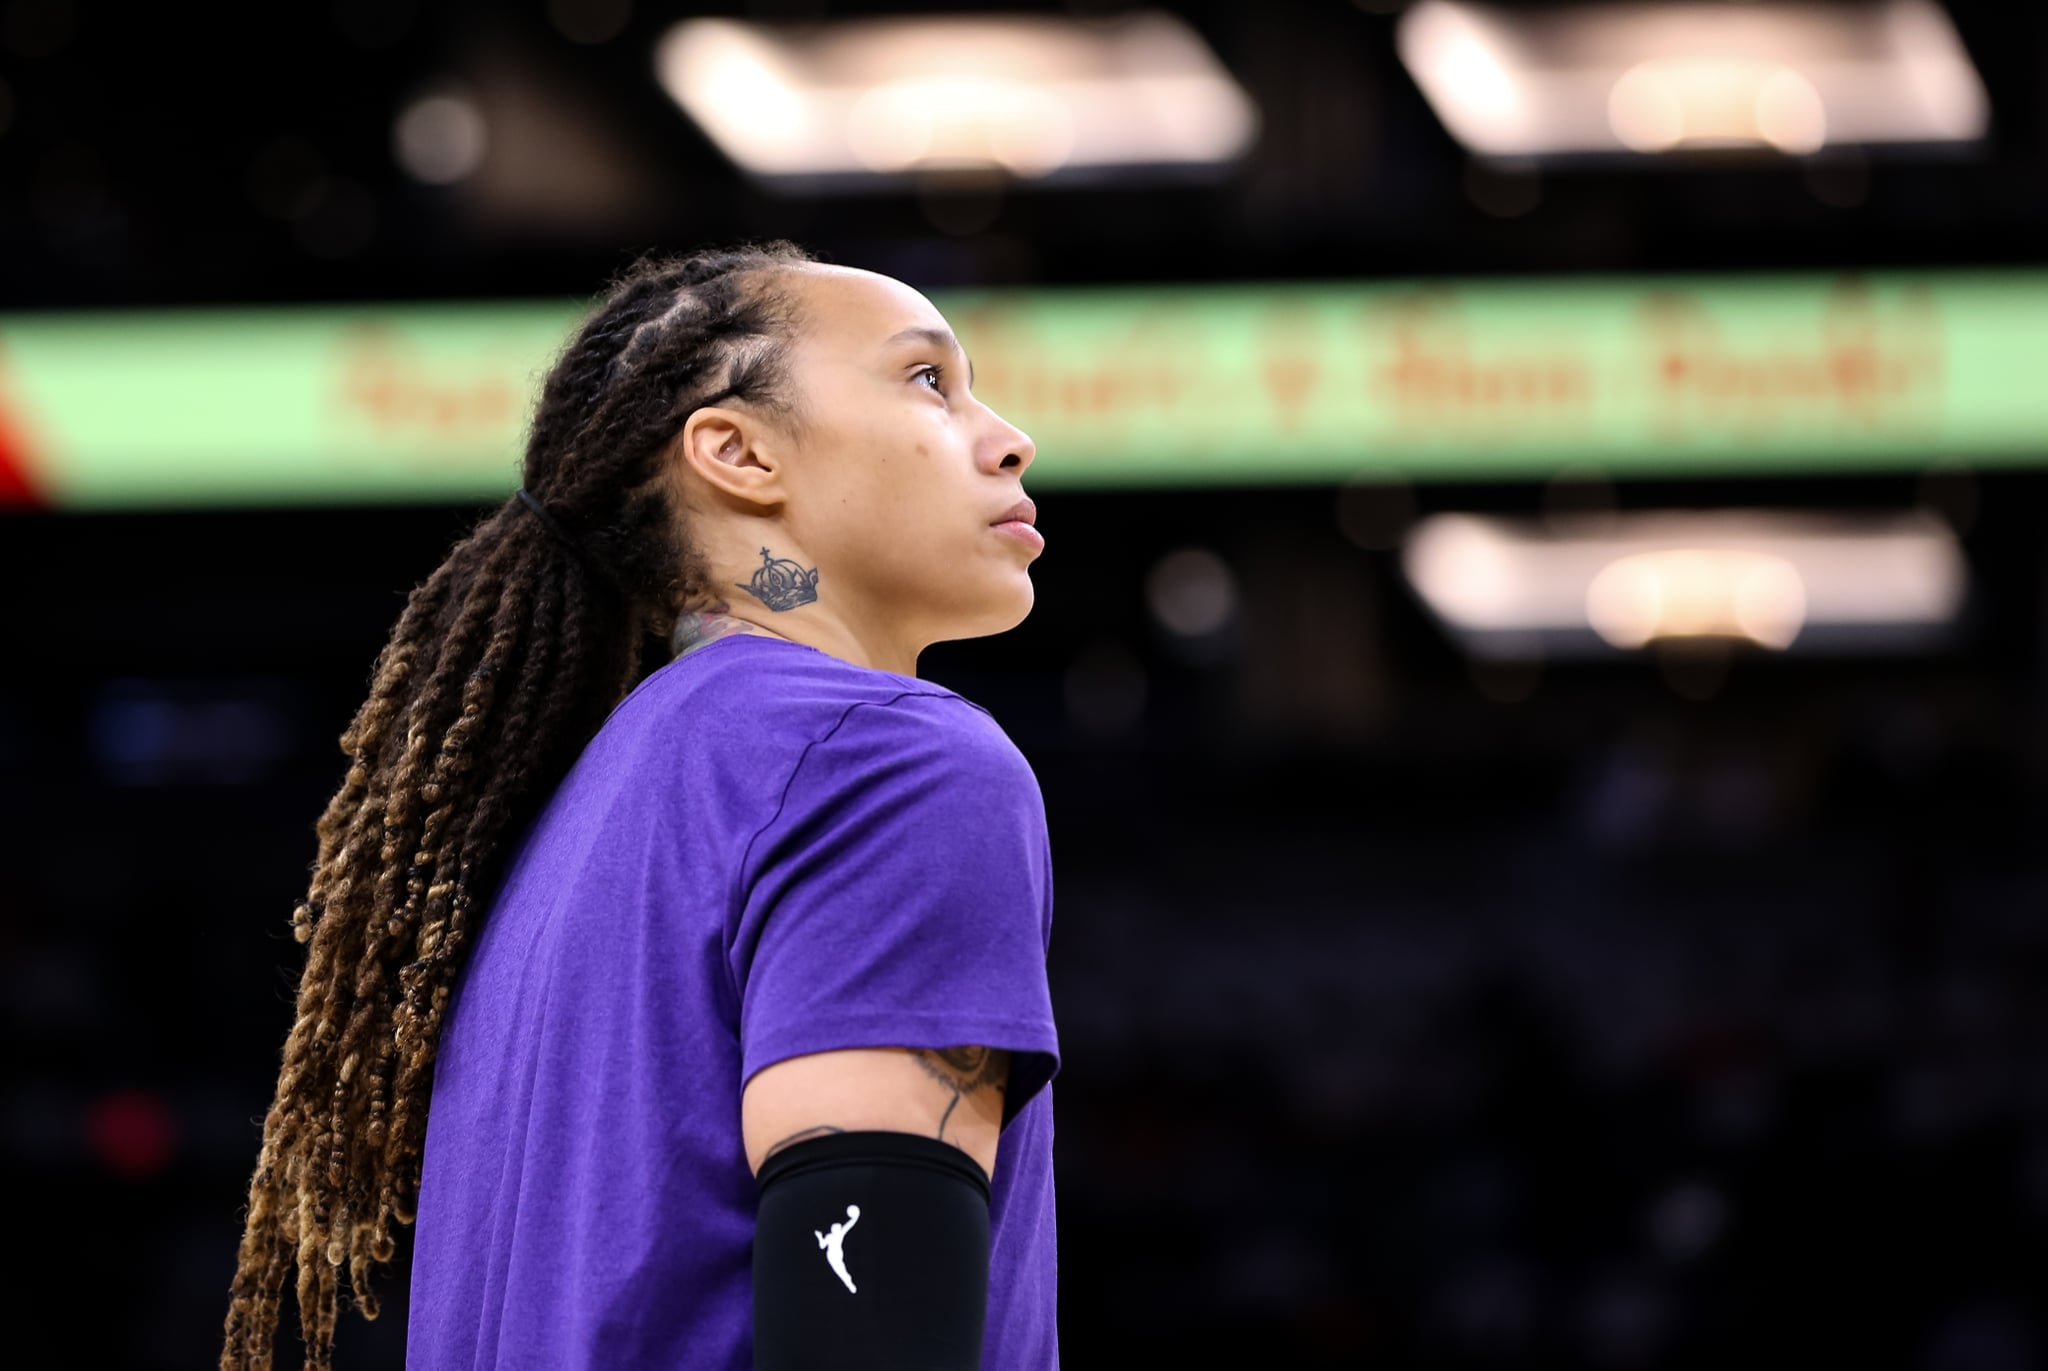 PHOENIX, ARIZONA - OCTOBER 10: Brittney Griner #42 of the Phoenix Mercury during pregame warm up at Footprint Center on October 10, 2021 in Phoenix, Arizona.  NOTICE TO USER: User expressly acknowledges and agrees that by downloading and/or using this photograph, the user agrees to the terms of the Getty Images License Agreement.  (Photo by Mike Mattina/Getty Images)